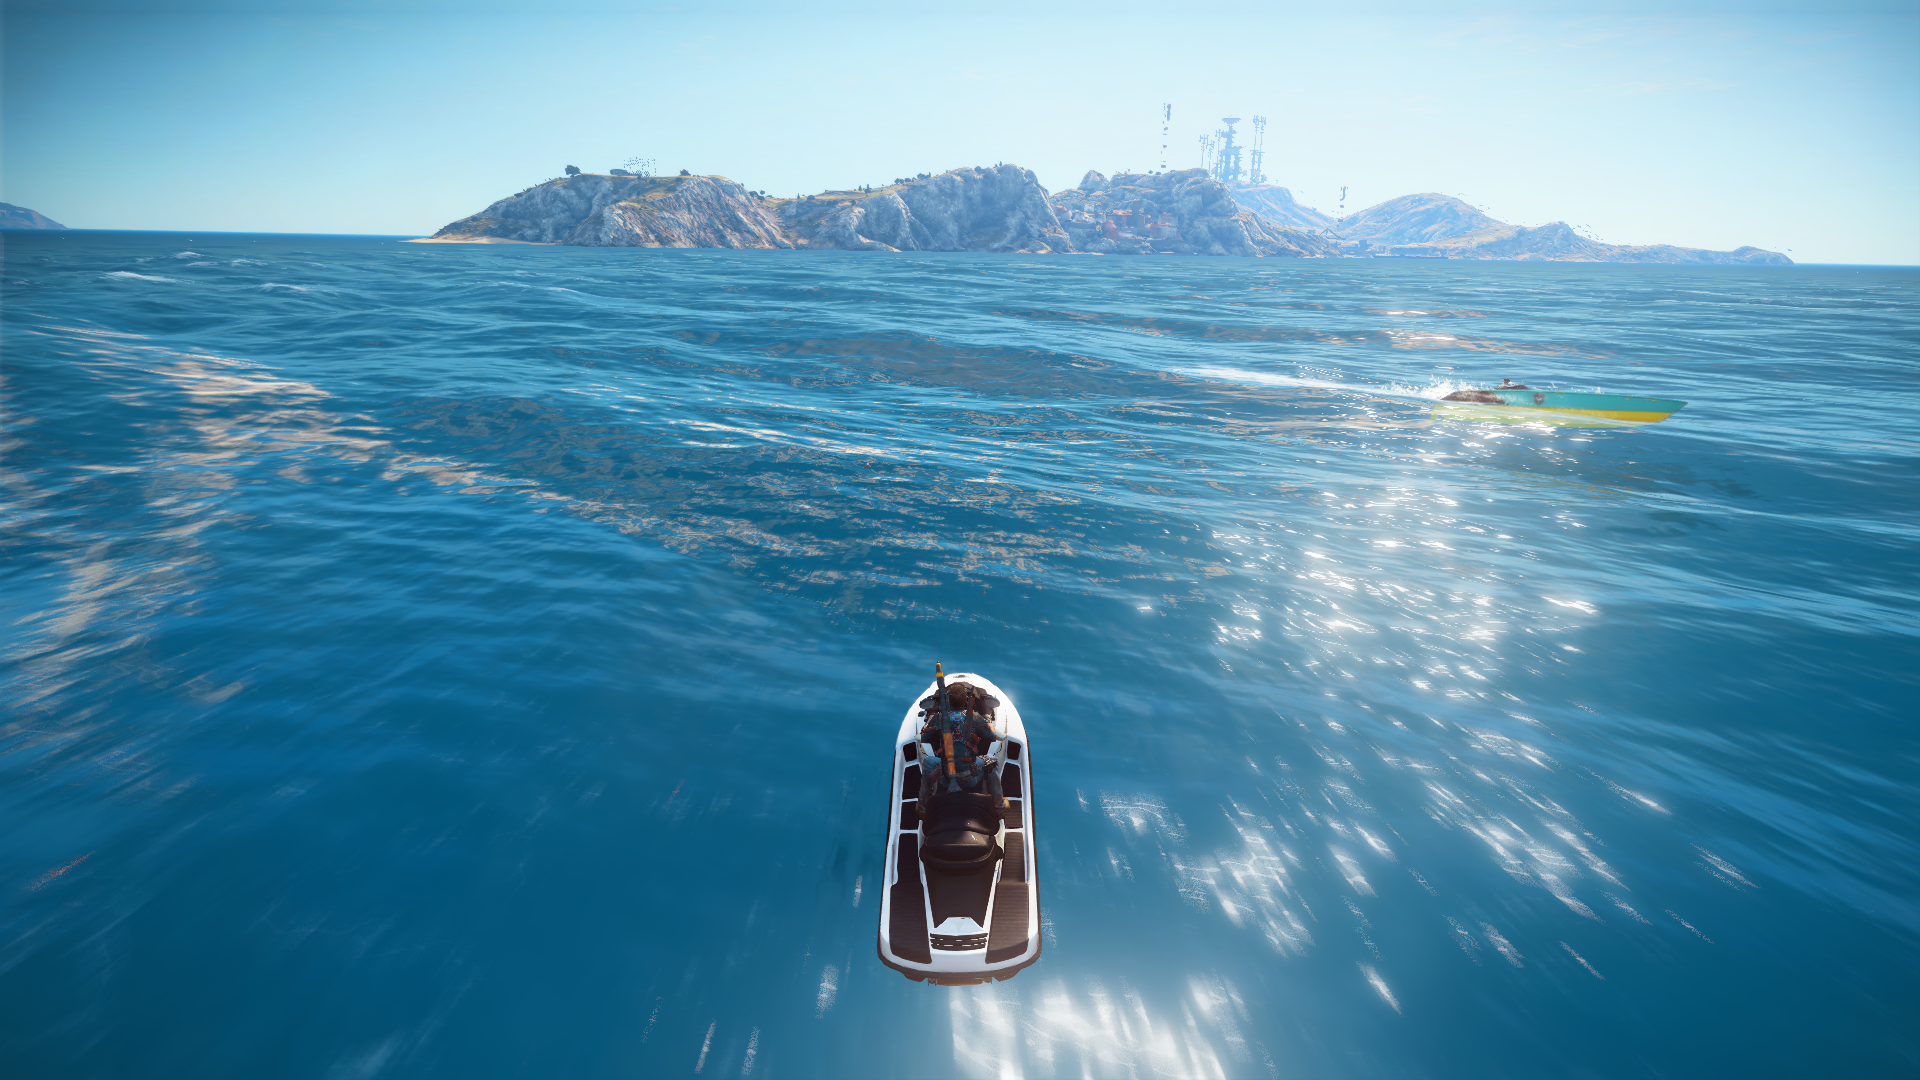 justcause3_20151201235gs3z.png